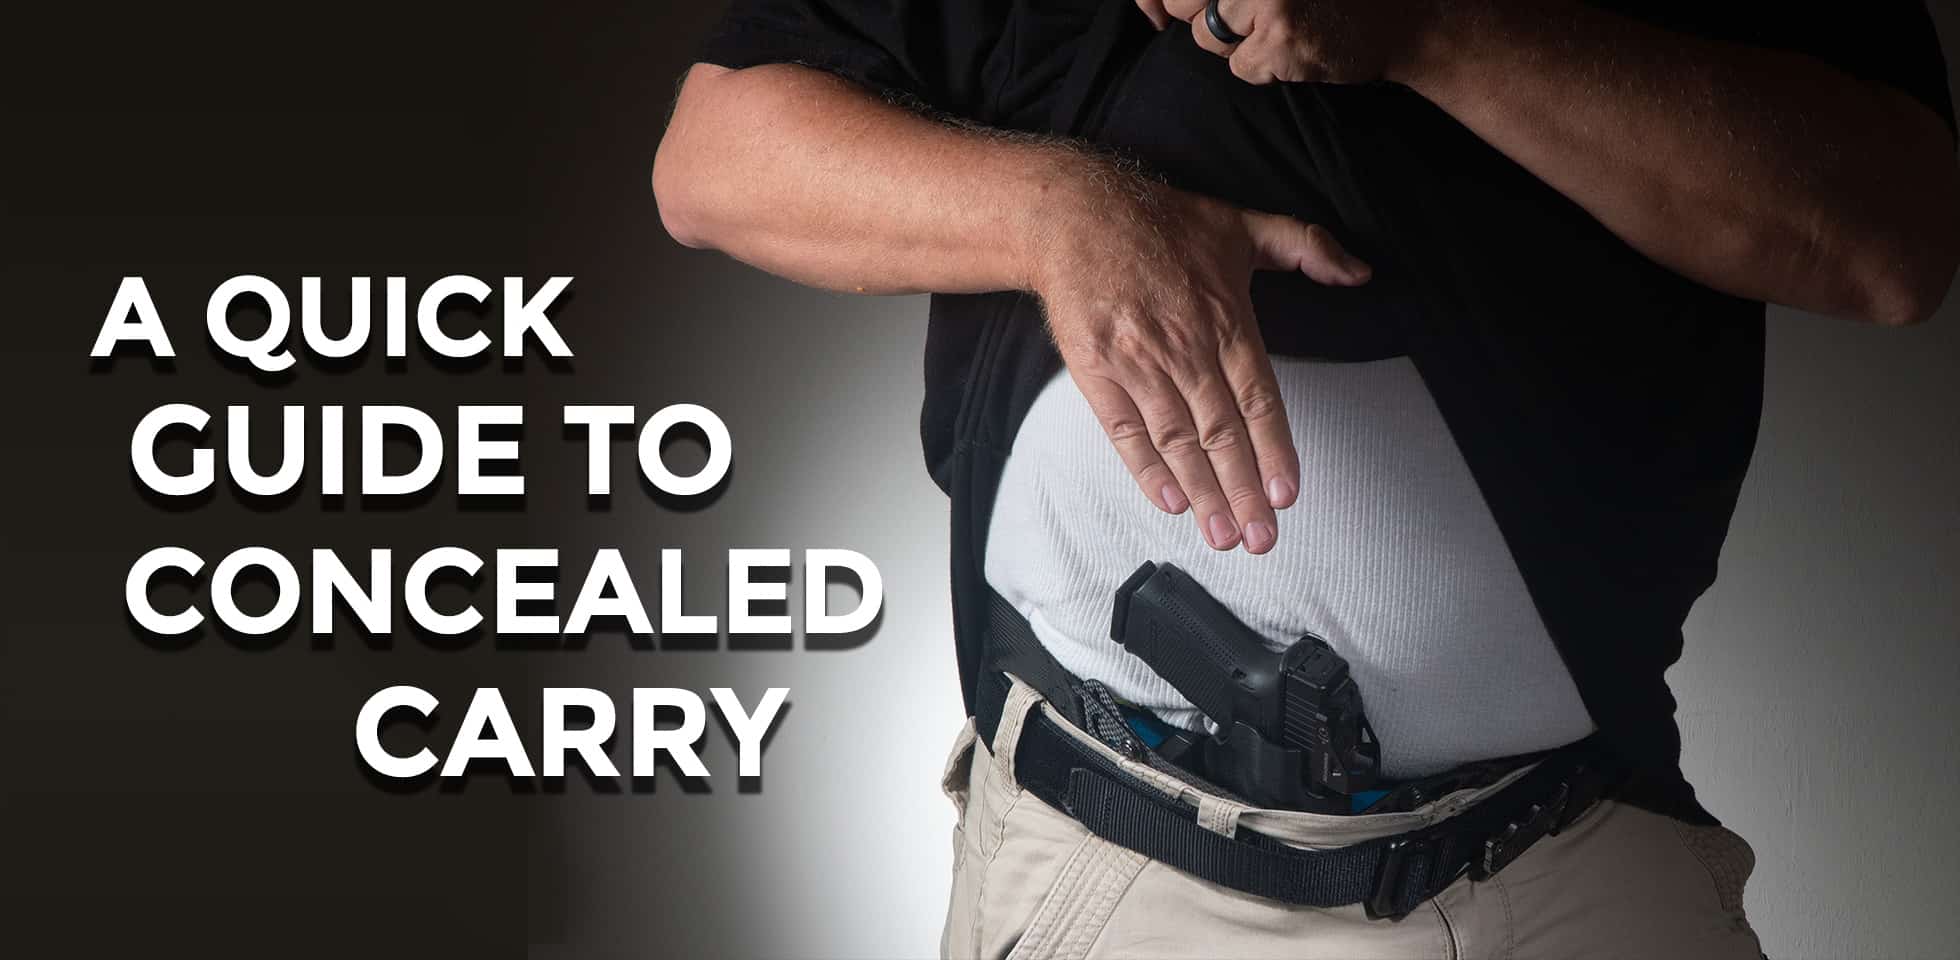 What Is The Best Way To Carry Concealed? - AmmoMan School of Guns Blog